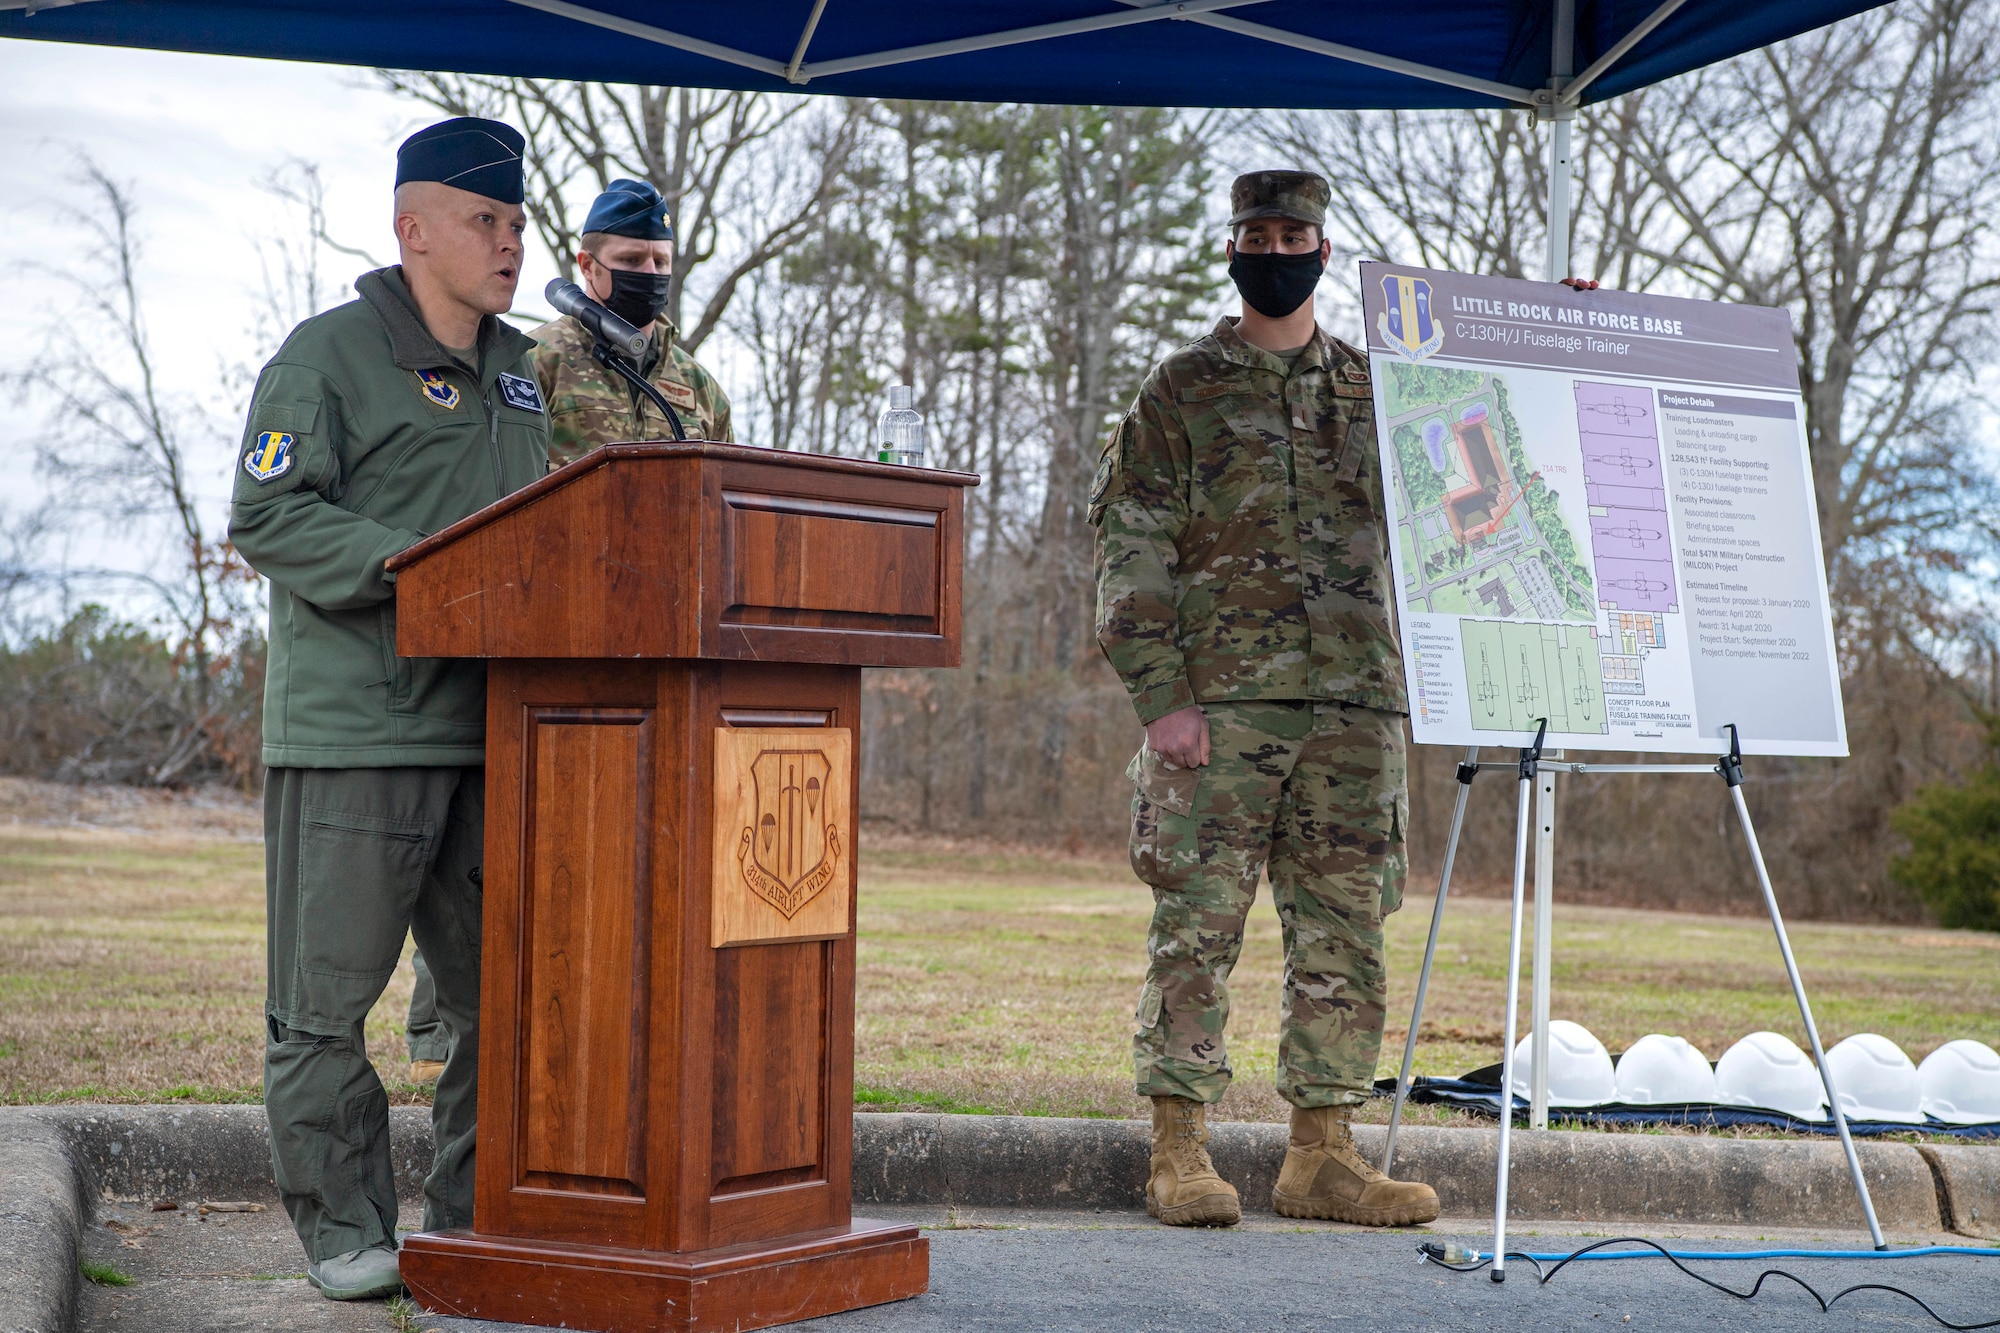 Col. Miller stands at a podium during a groundbreaking ceremony.